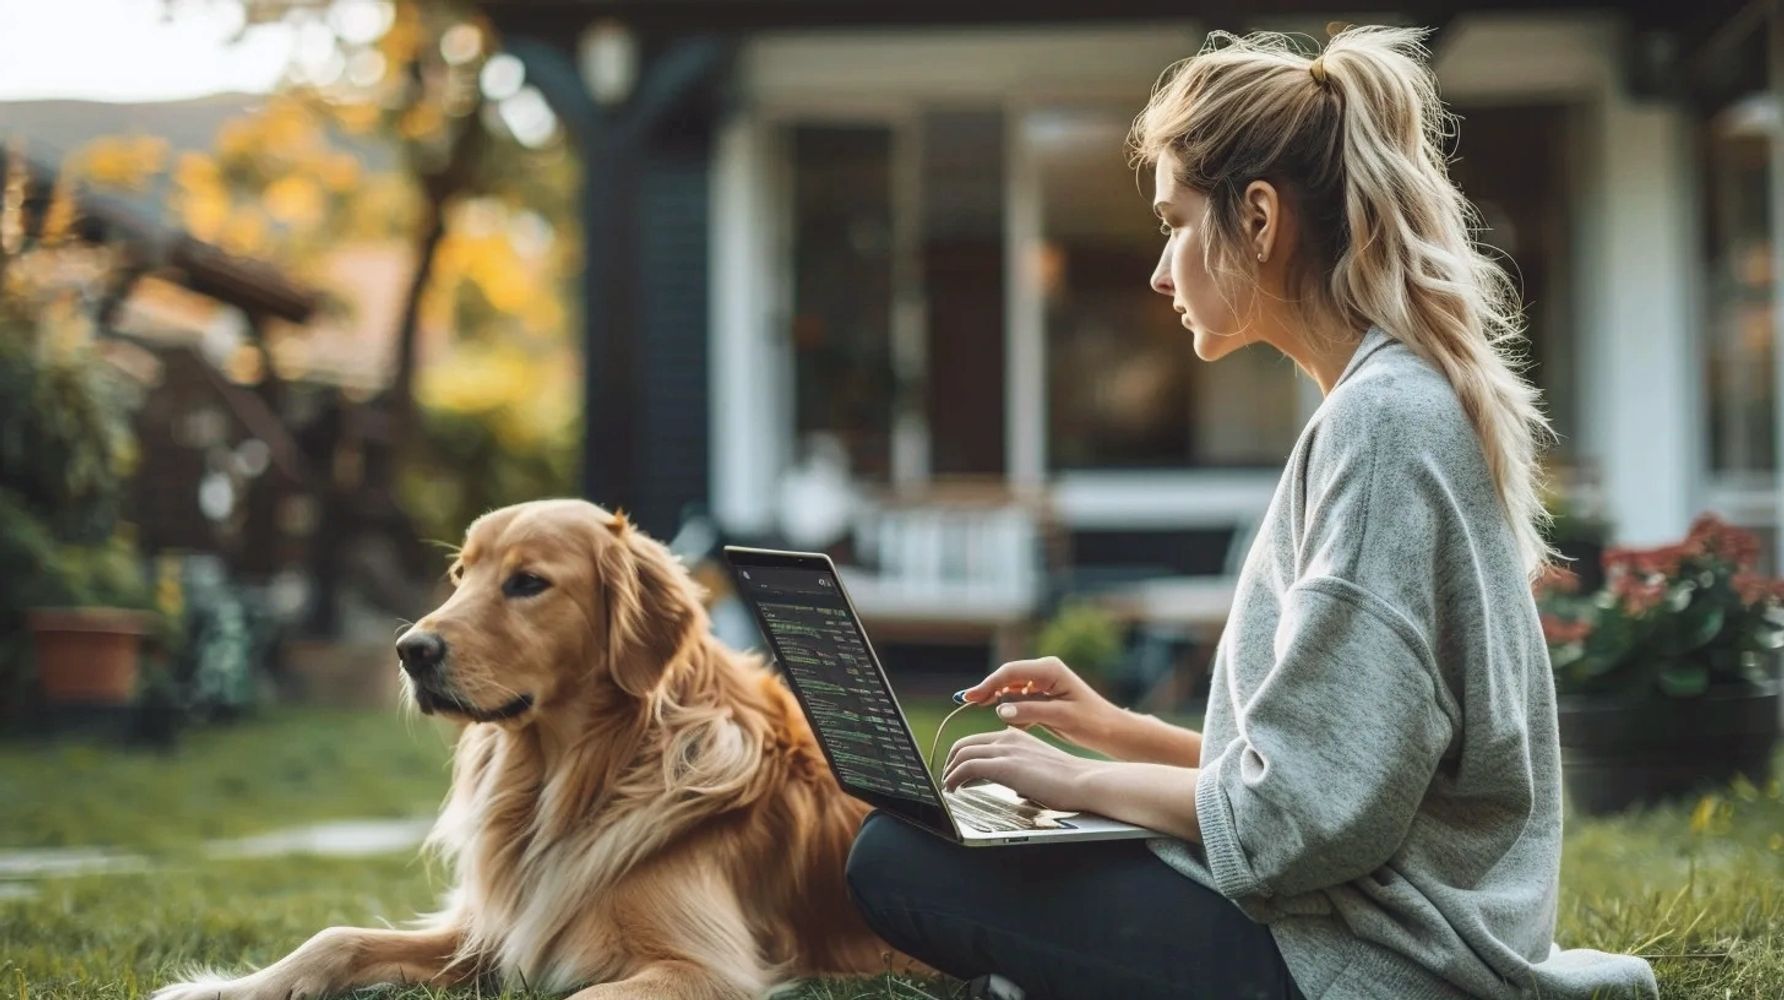 A woman finds comfort in the company of her golden retriever as she focuses on her laptop.